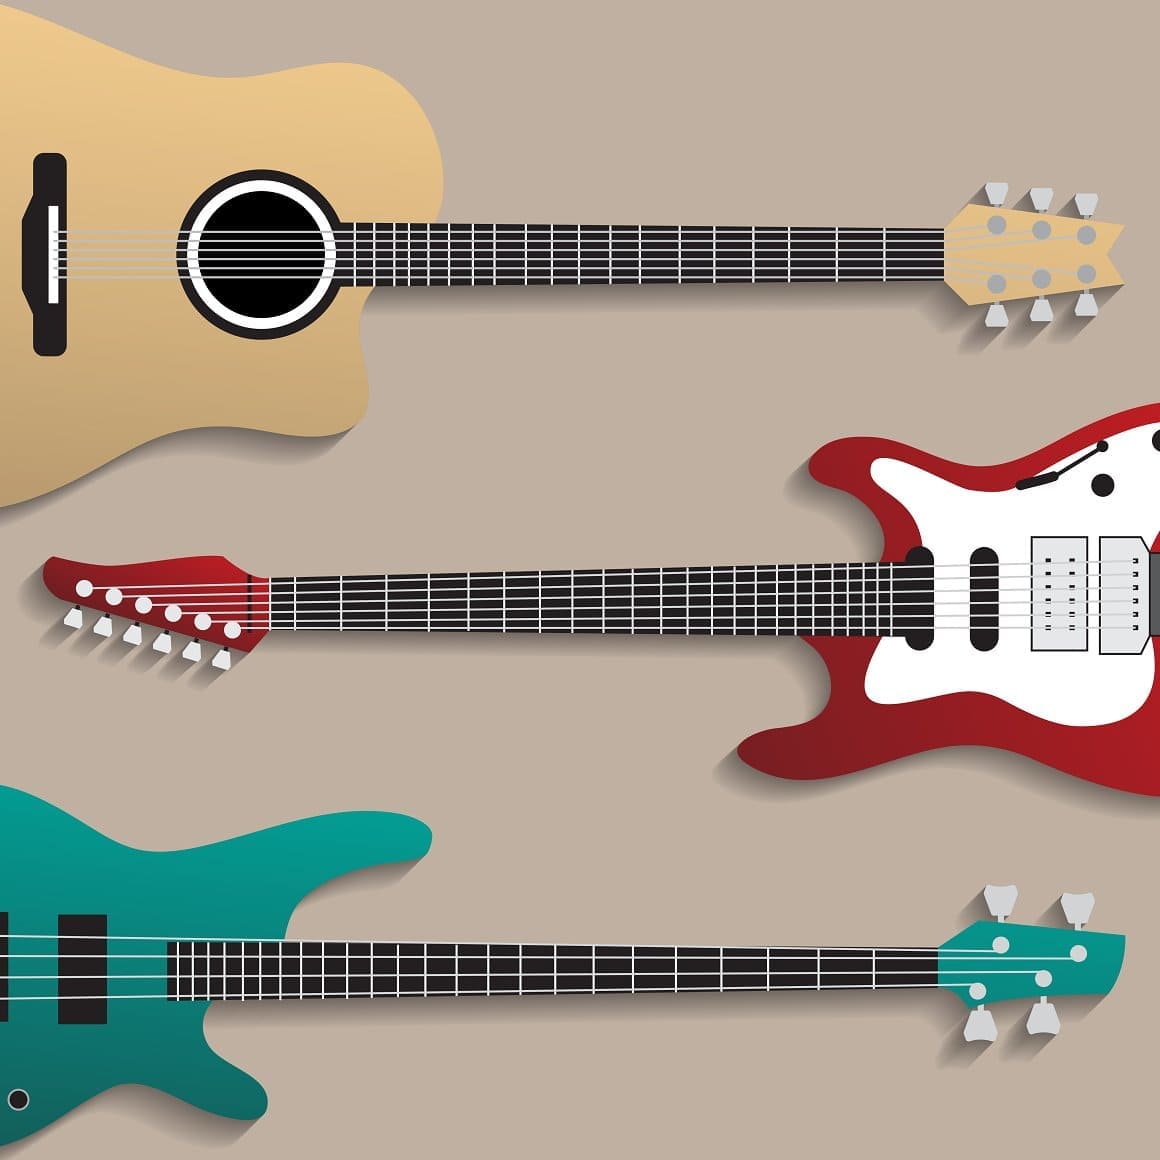 Guitars in three horizontal rows, acoustic and two electric guitars.